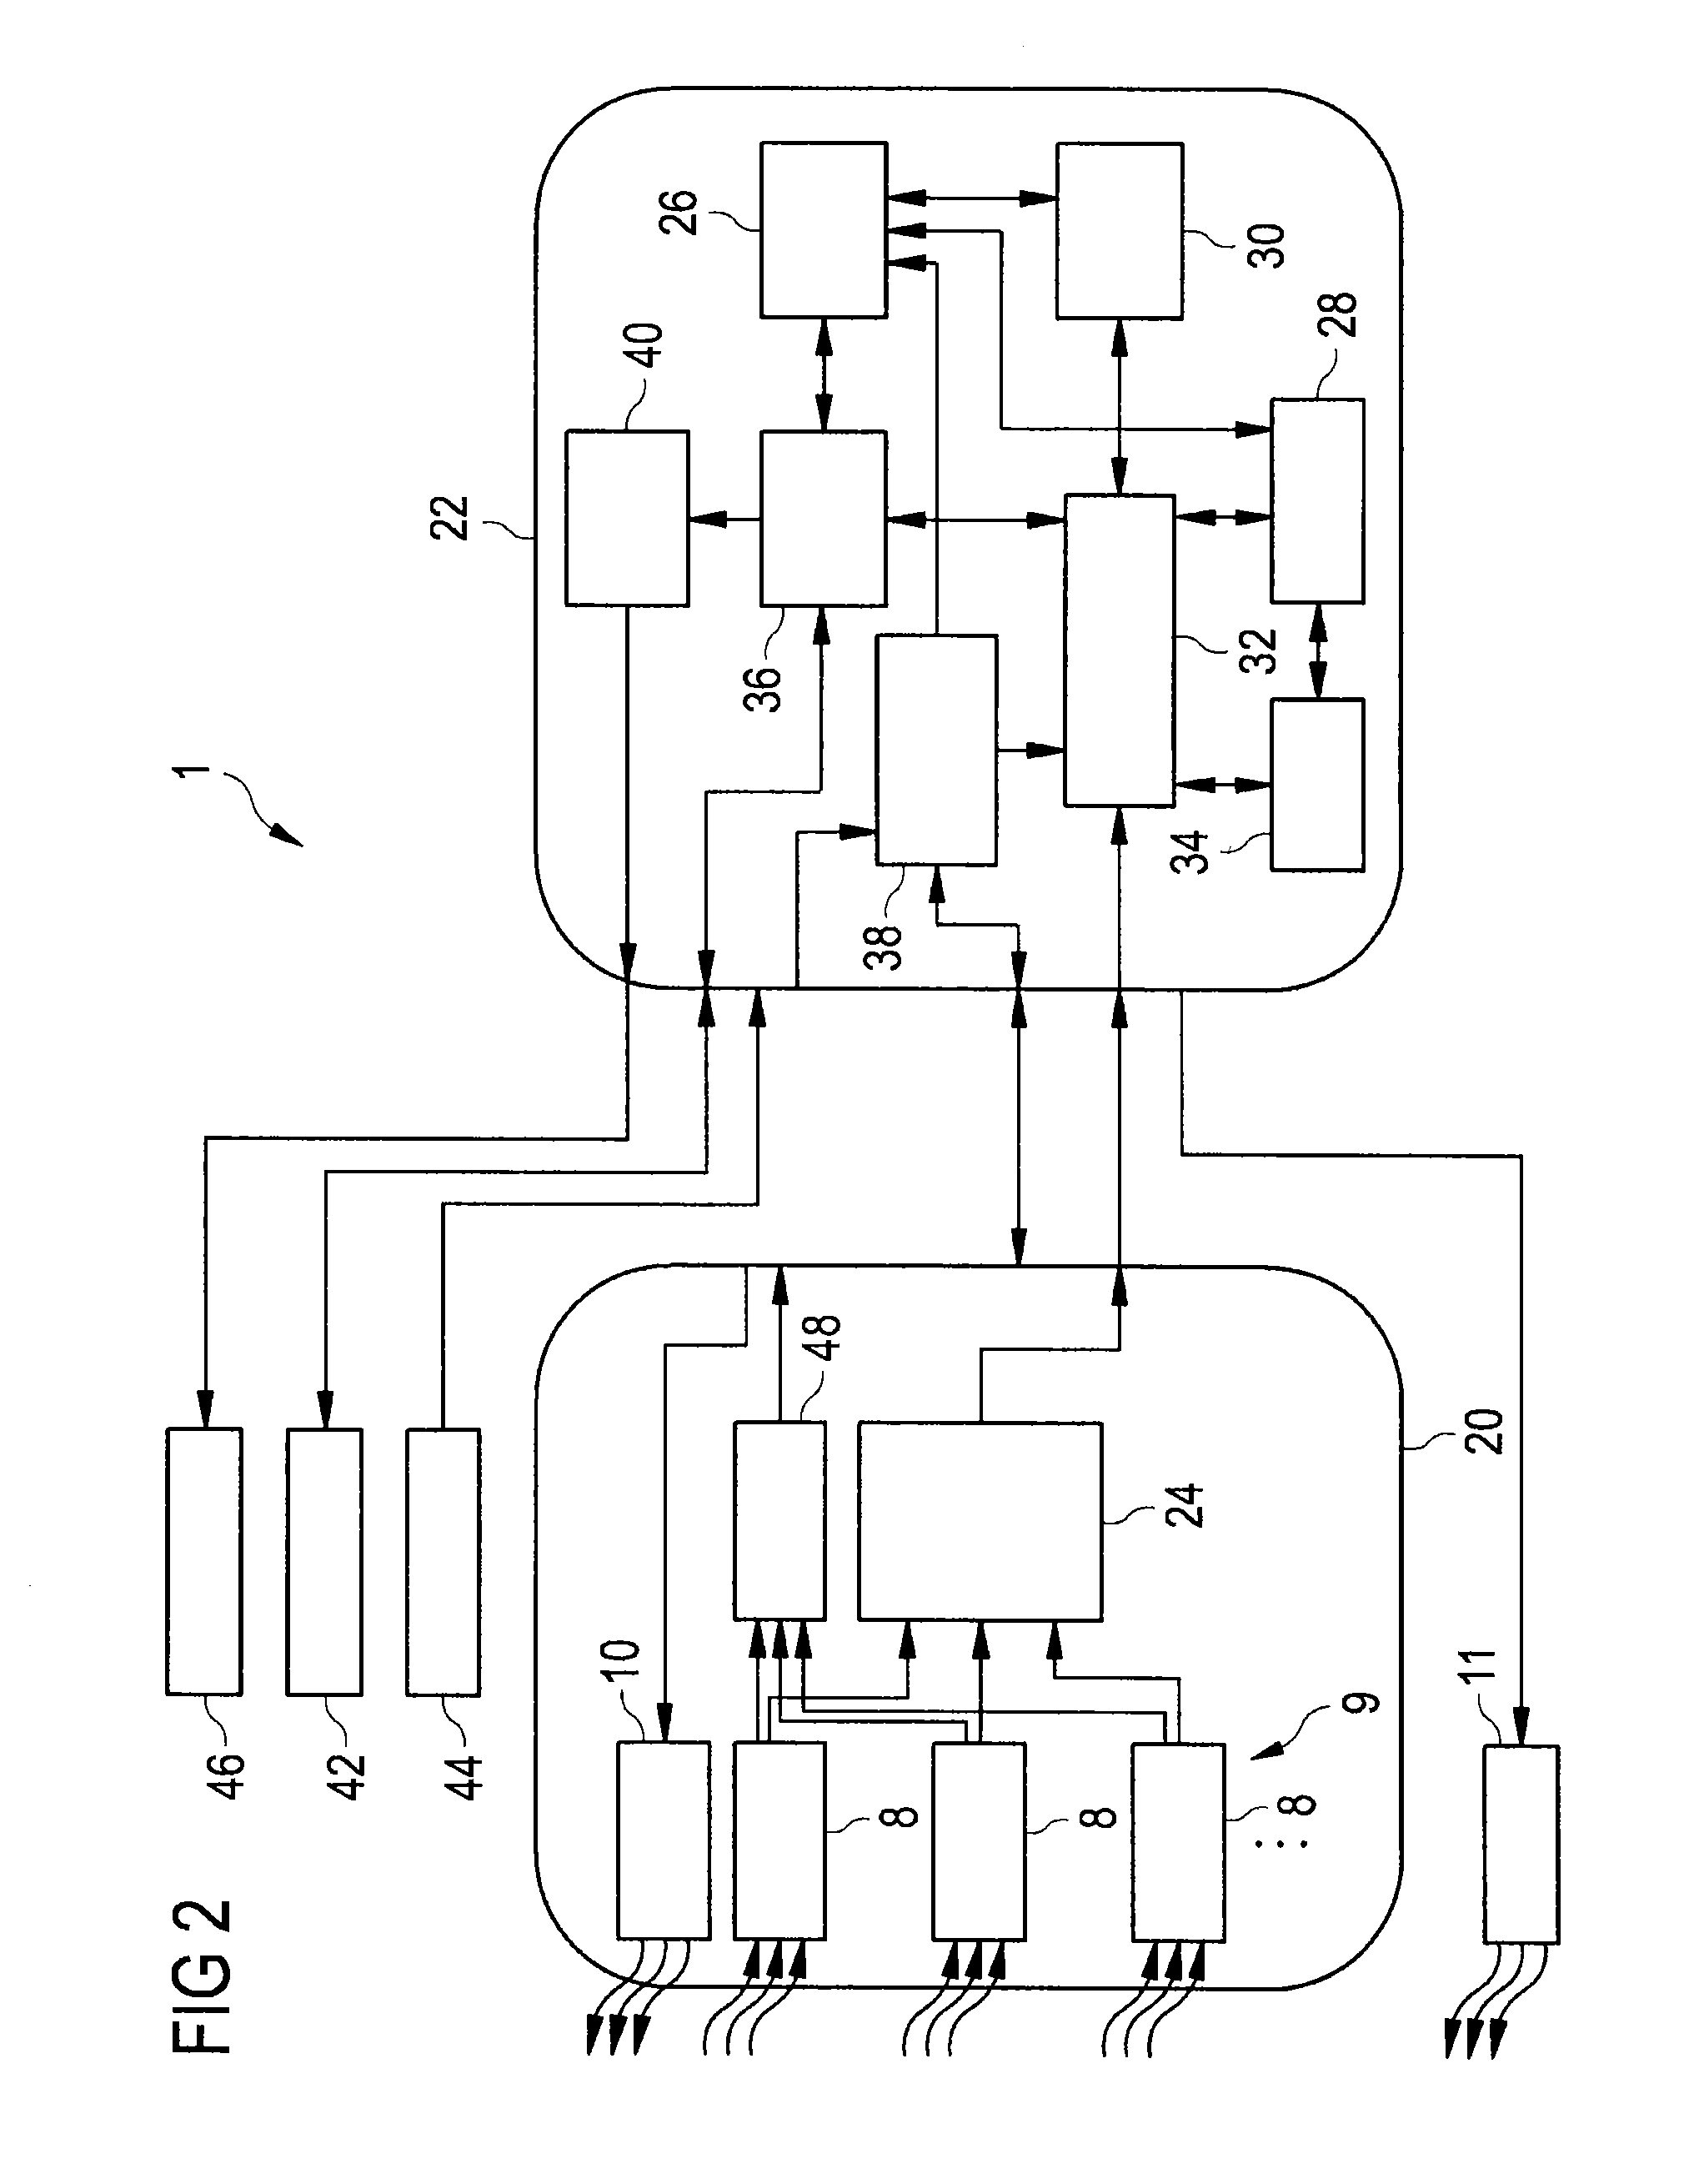 Methods and devices for controlling electrical devices using motion detection